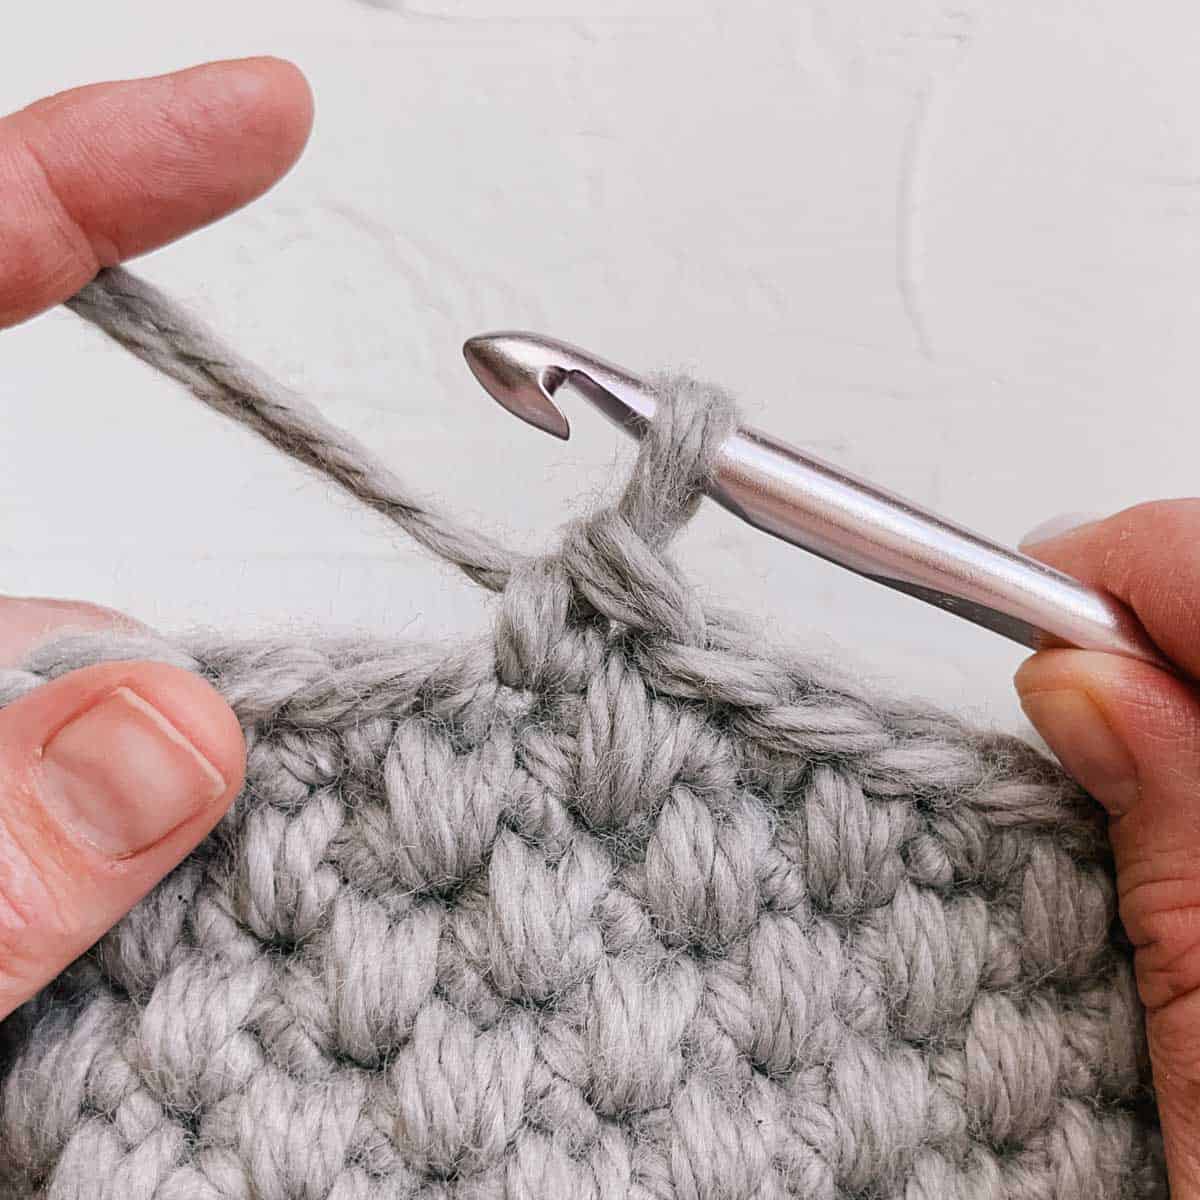 Crochet spike stitch step 4: where to insert the hook.